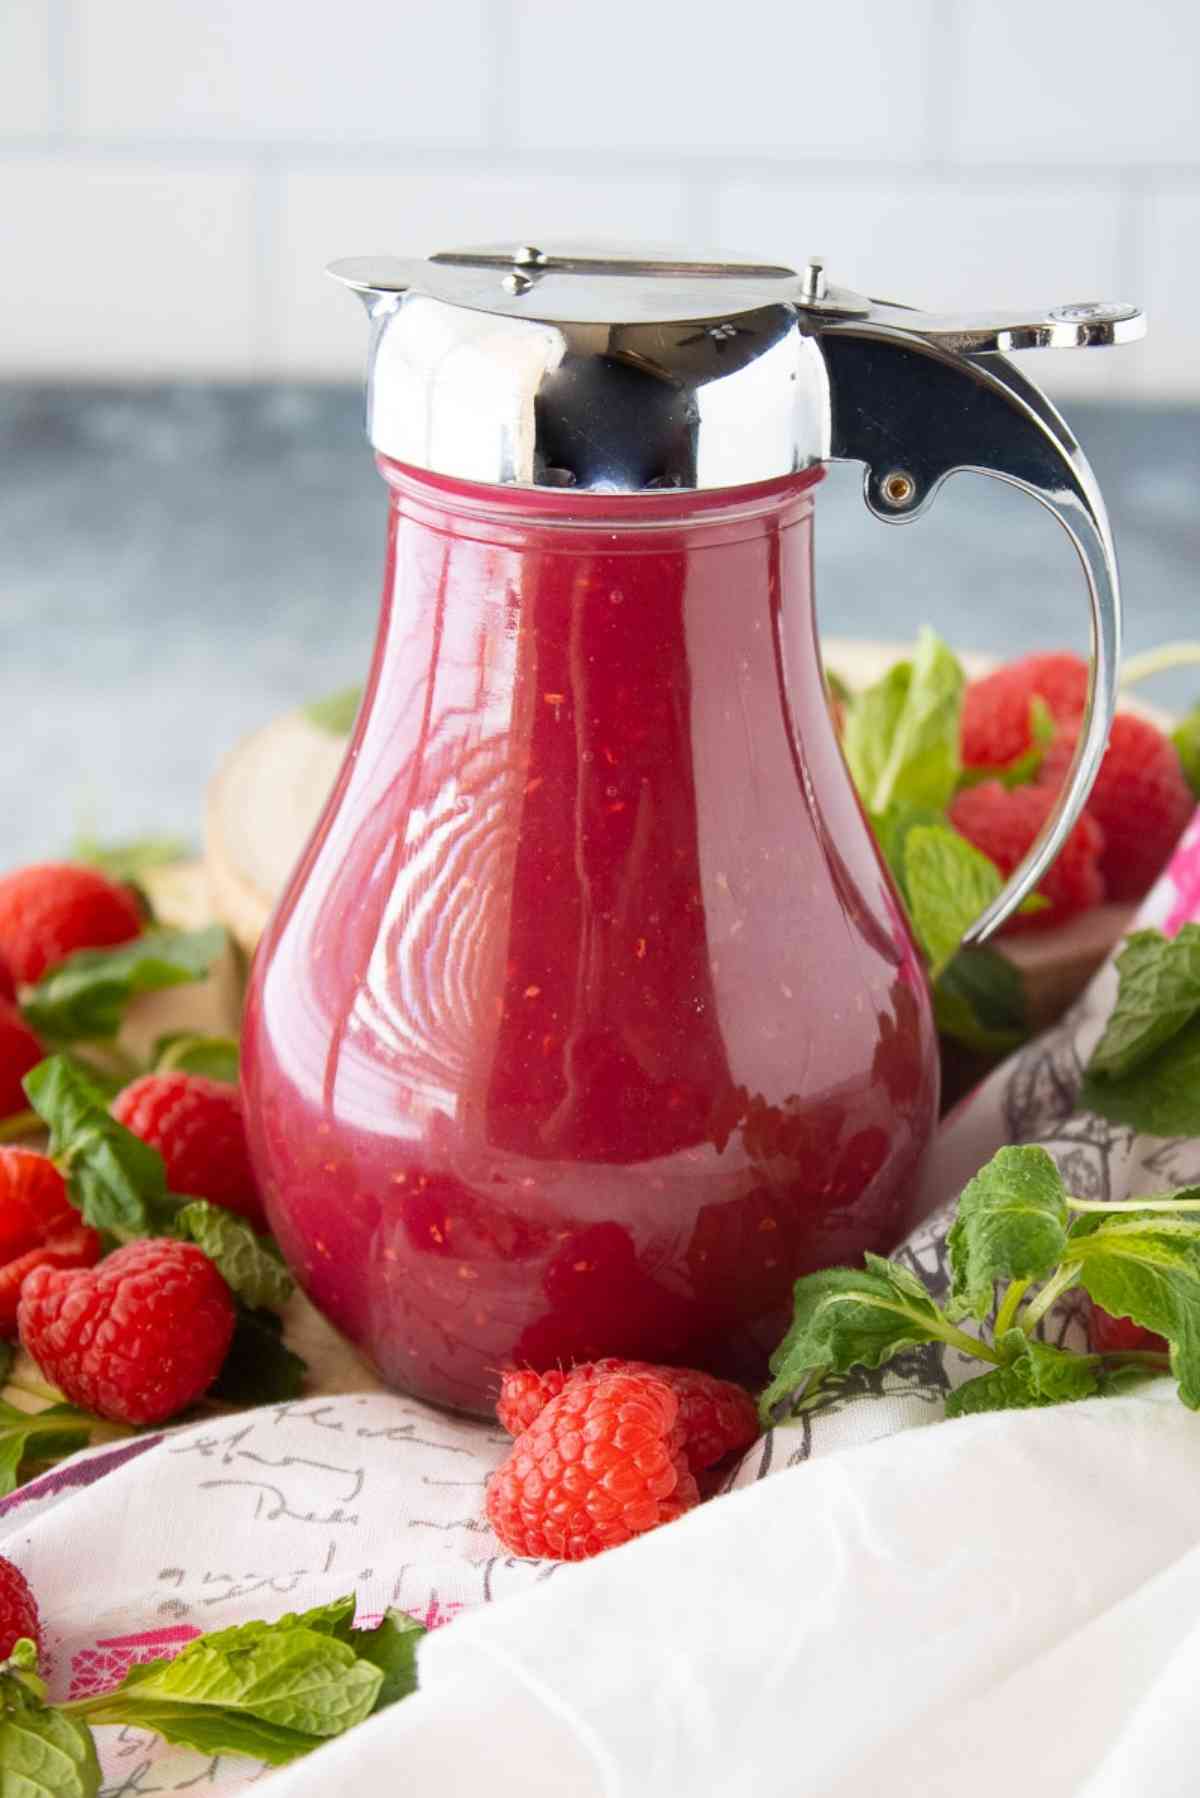 Bottle of raspberry cream syrup surrounded by fresh raspberries and mint.